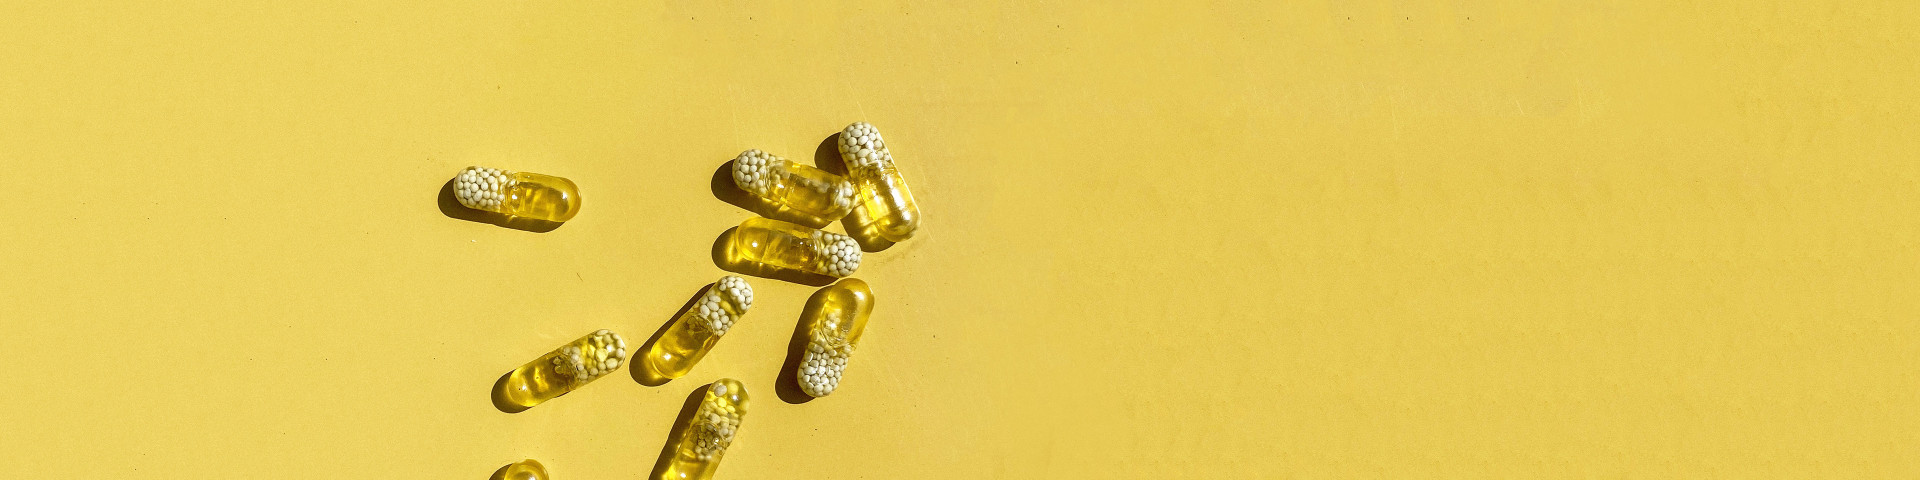 Not all multivitamins for women are created equal. Make sure you ask these key questions before committing to a formula you can actually trust.